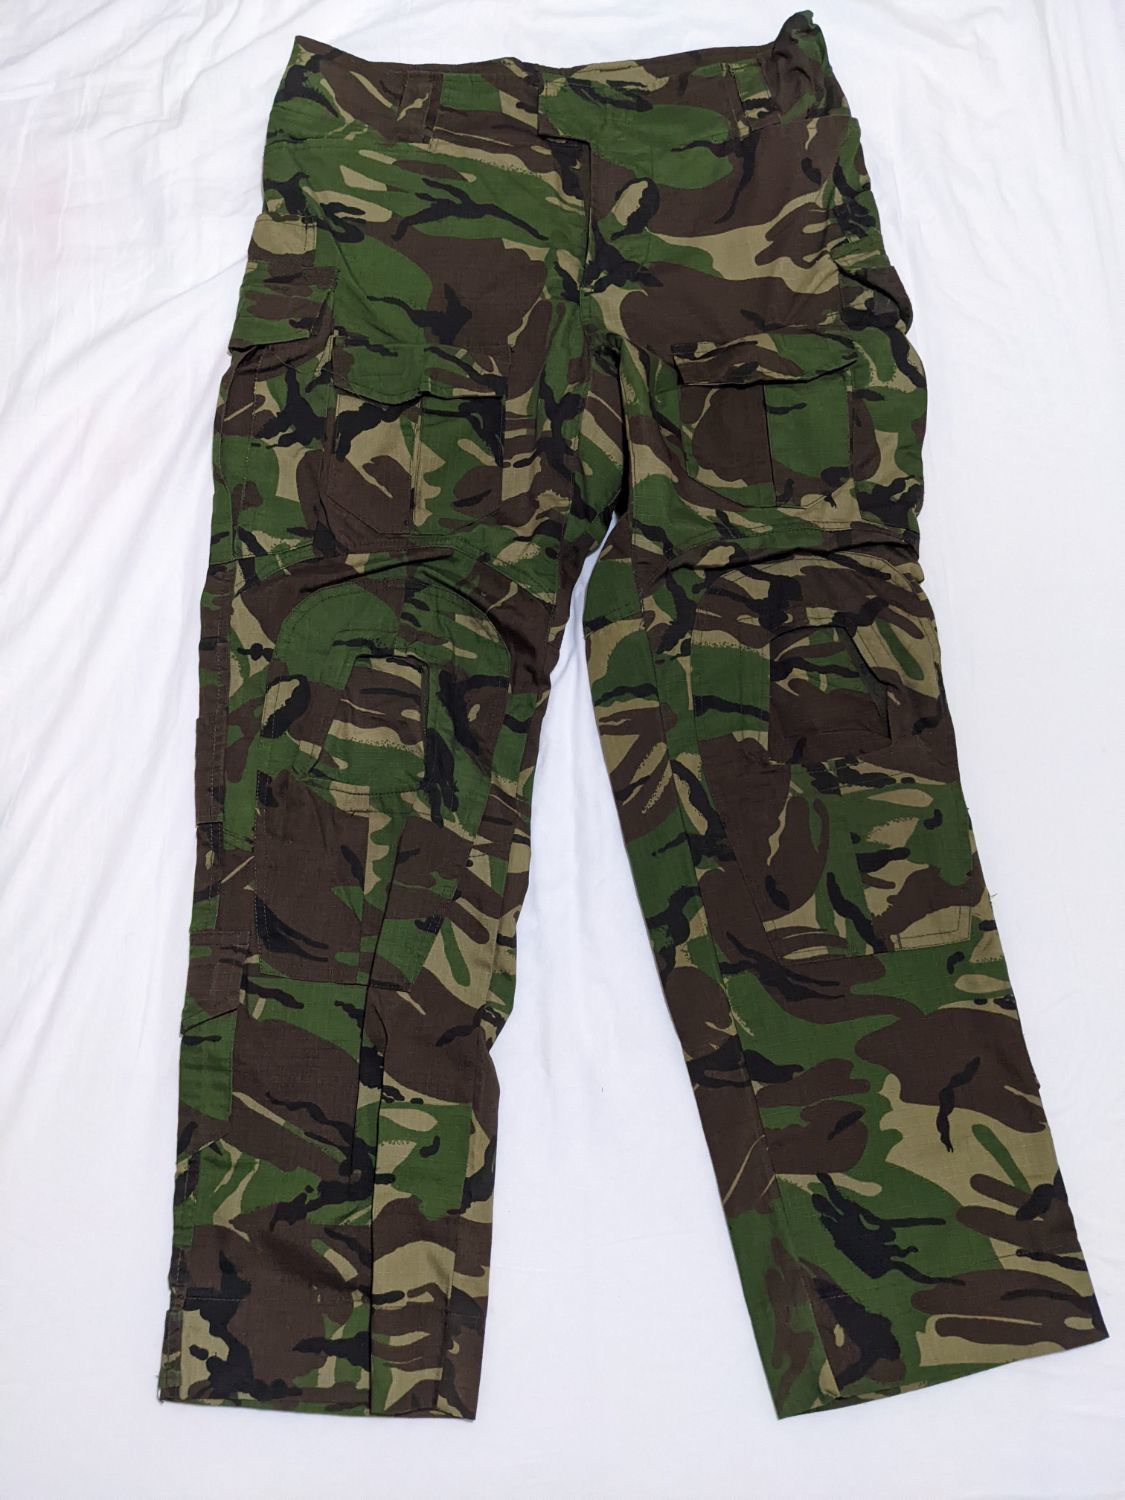 British Tropical DPM Trousers | What Price Glory - www.Onlinemilitaria.com